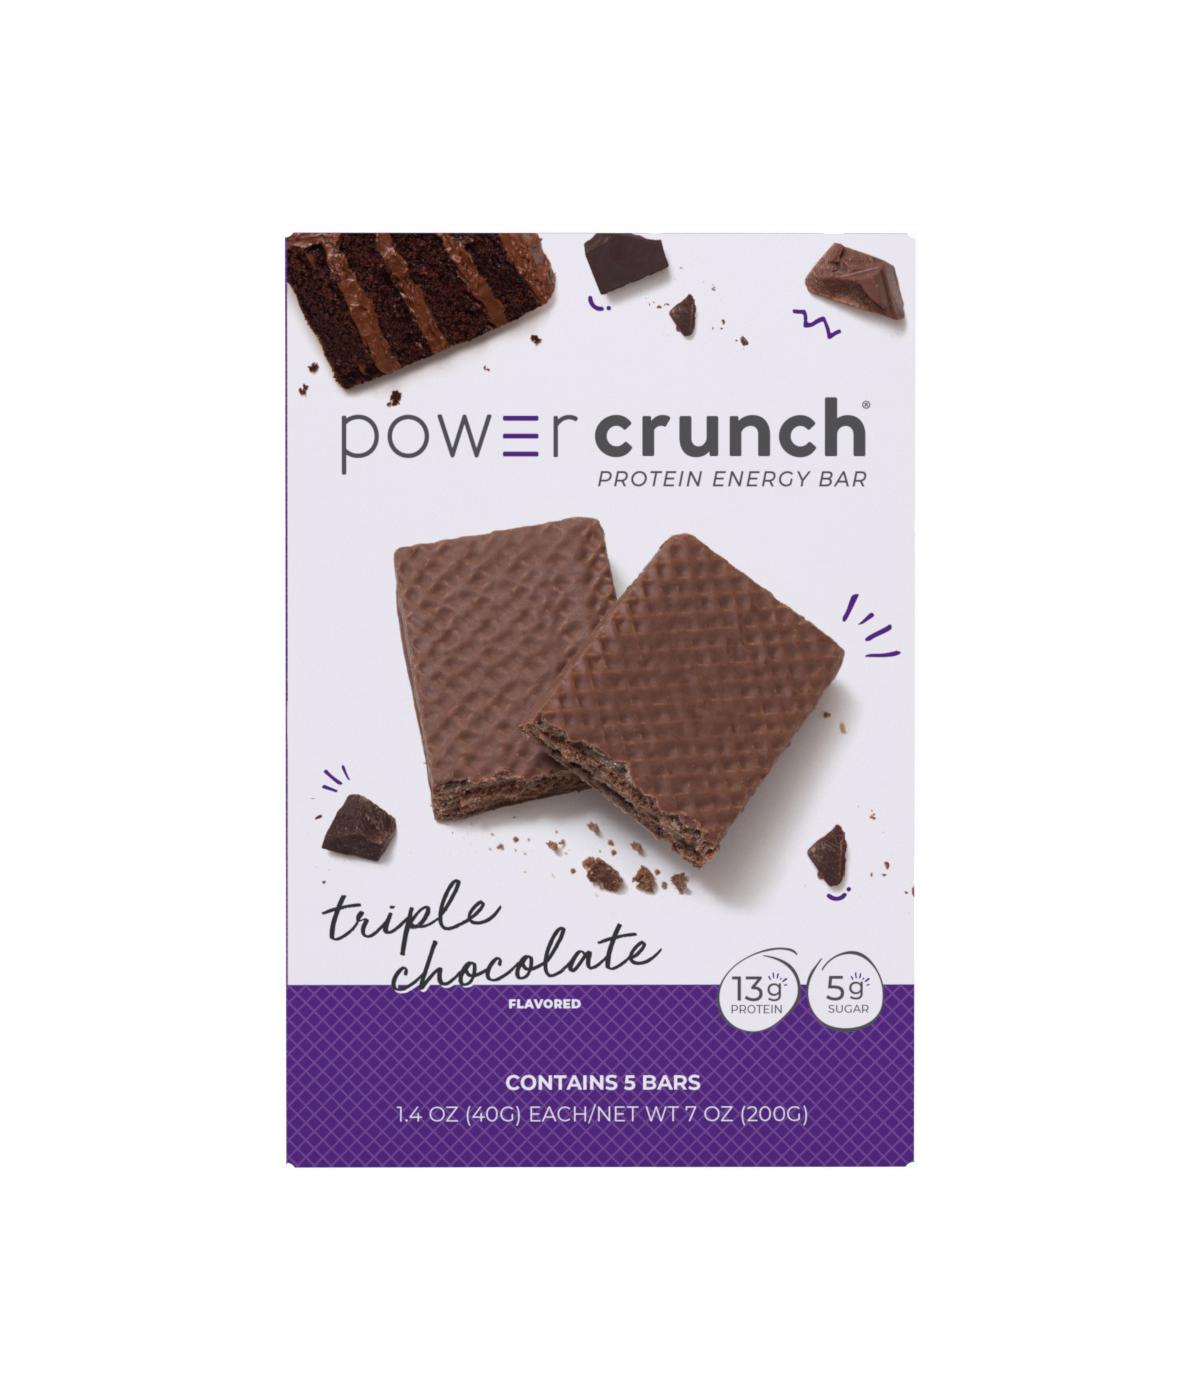 Power Crunch 13g Protein Energy Bars - Triple Chocolate; image 1 of 2